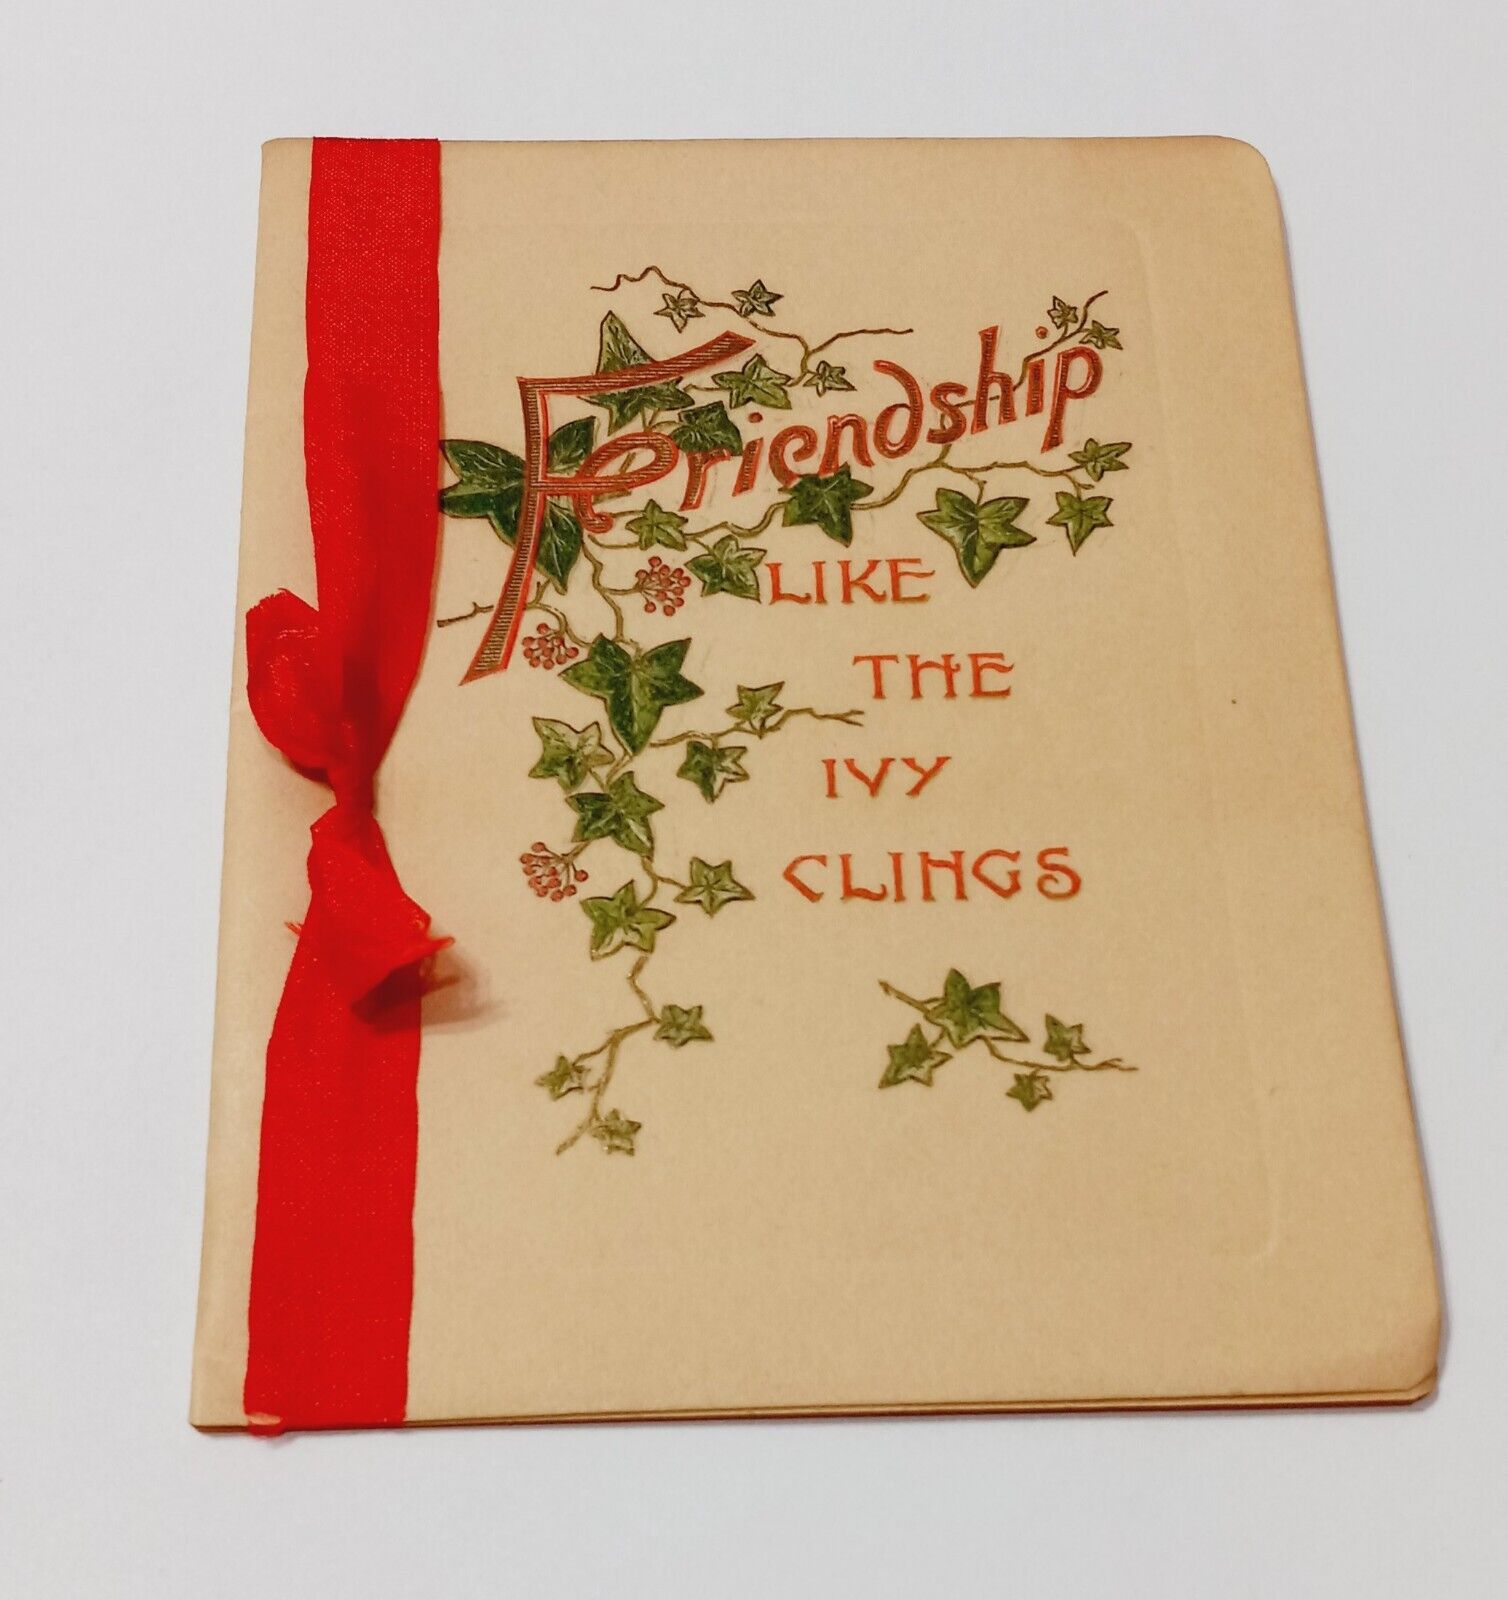 VICTORIAN ANTIQUE FRIENDSHIP GREETING CHRISTMAS CARD IVY CLINGS 1903 X-MAS CARD